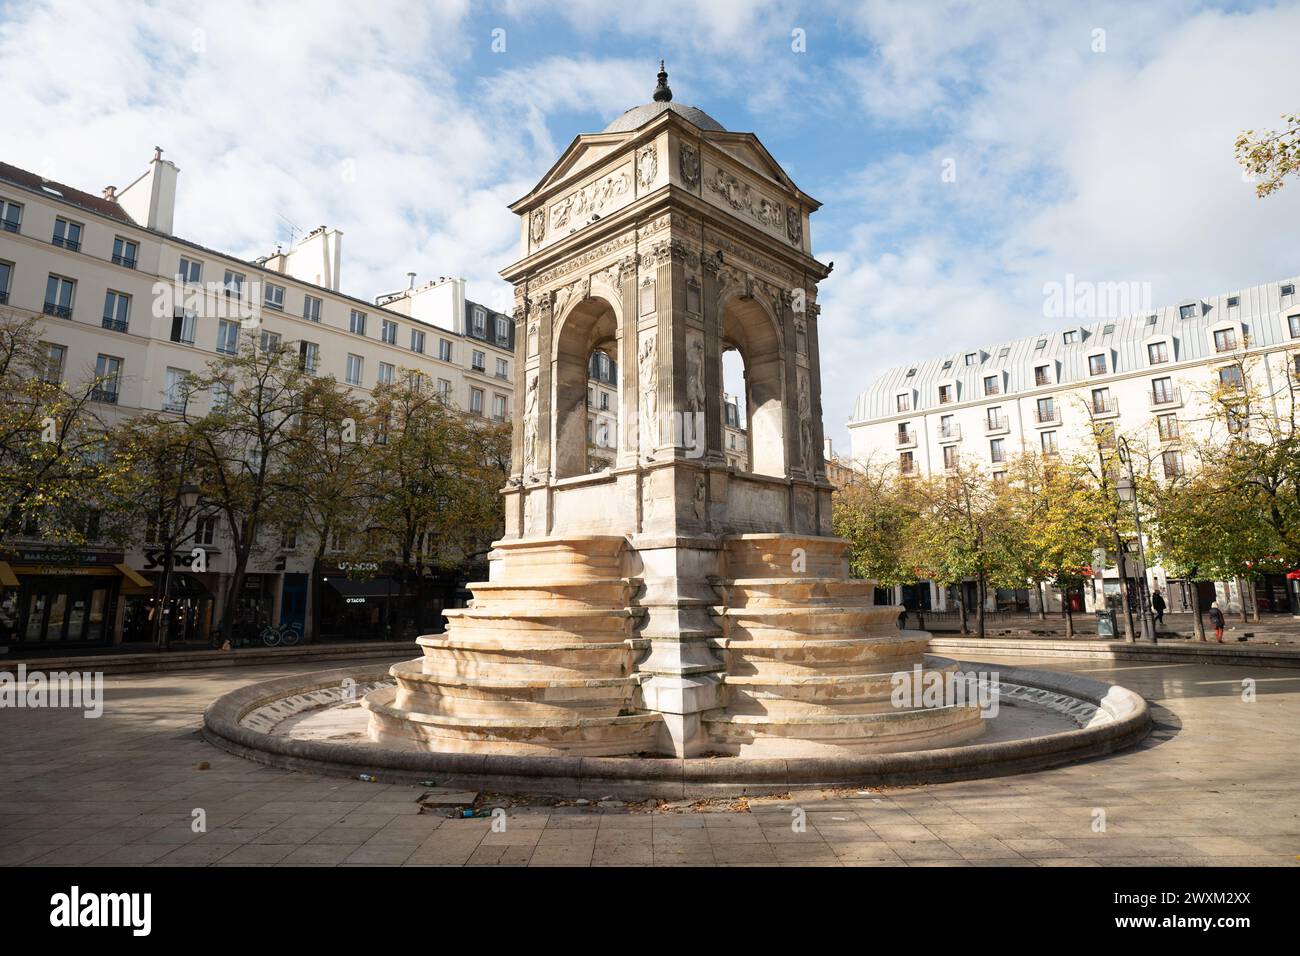 Fountain of innocents square in Paris, France Stock Photo